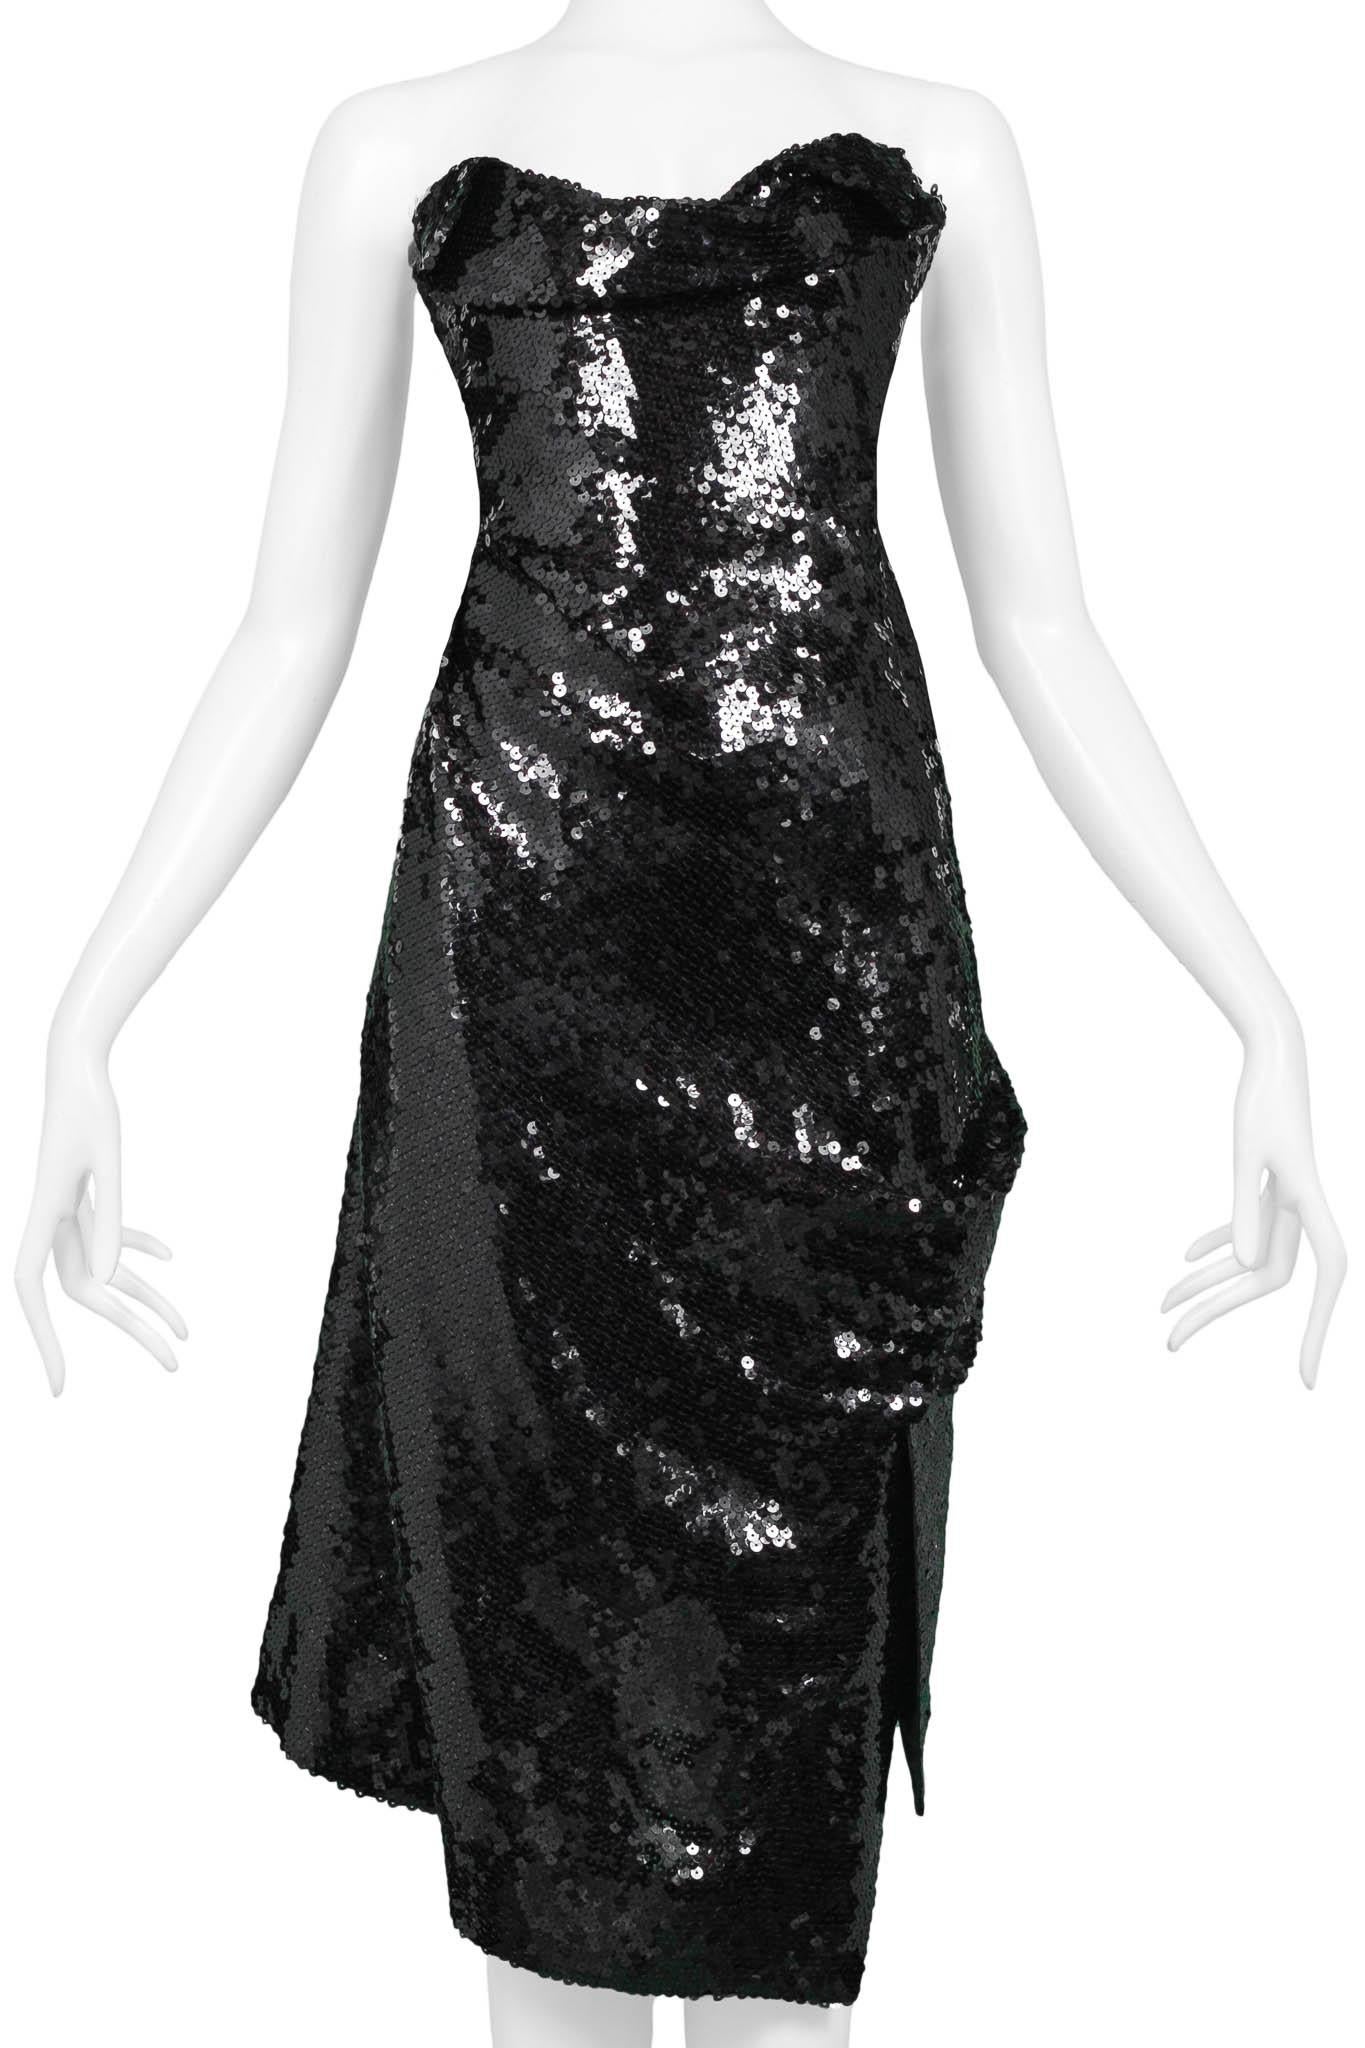 Vivienne Westwood Couture Black Sequin Strapless Dress In Excellent Condition For Sale In Los Angeles, CA